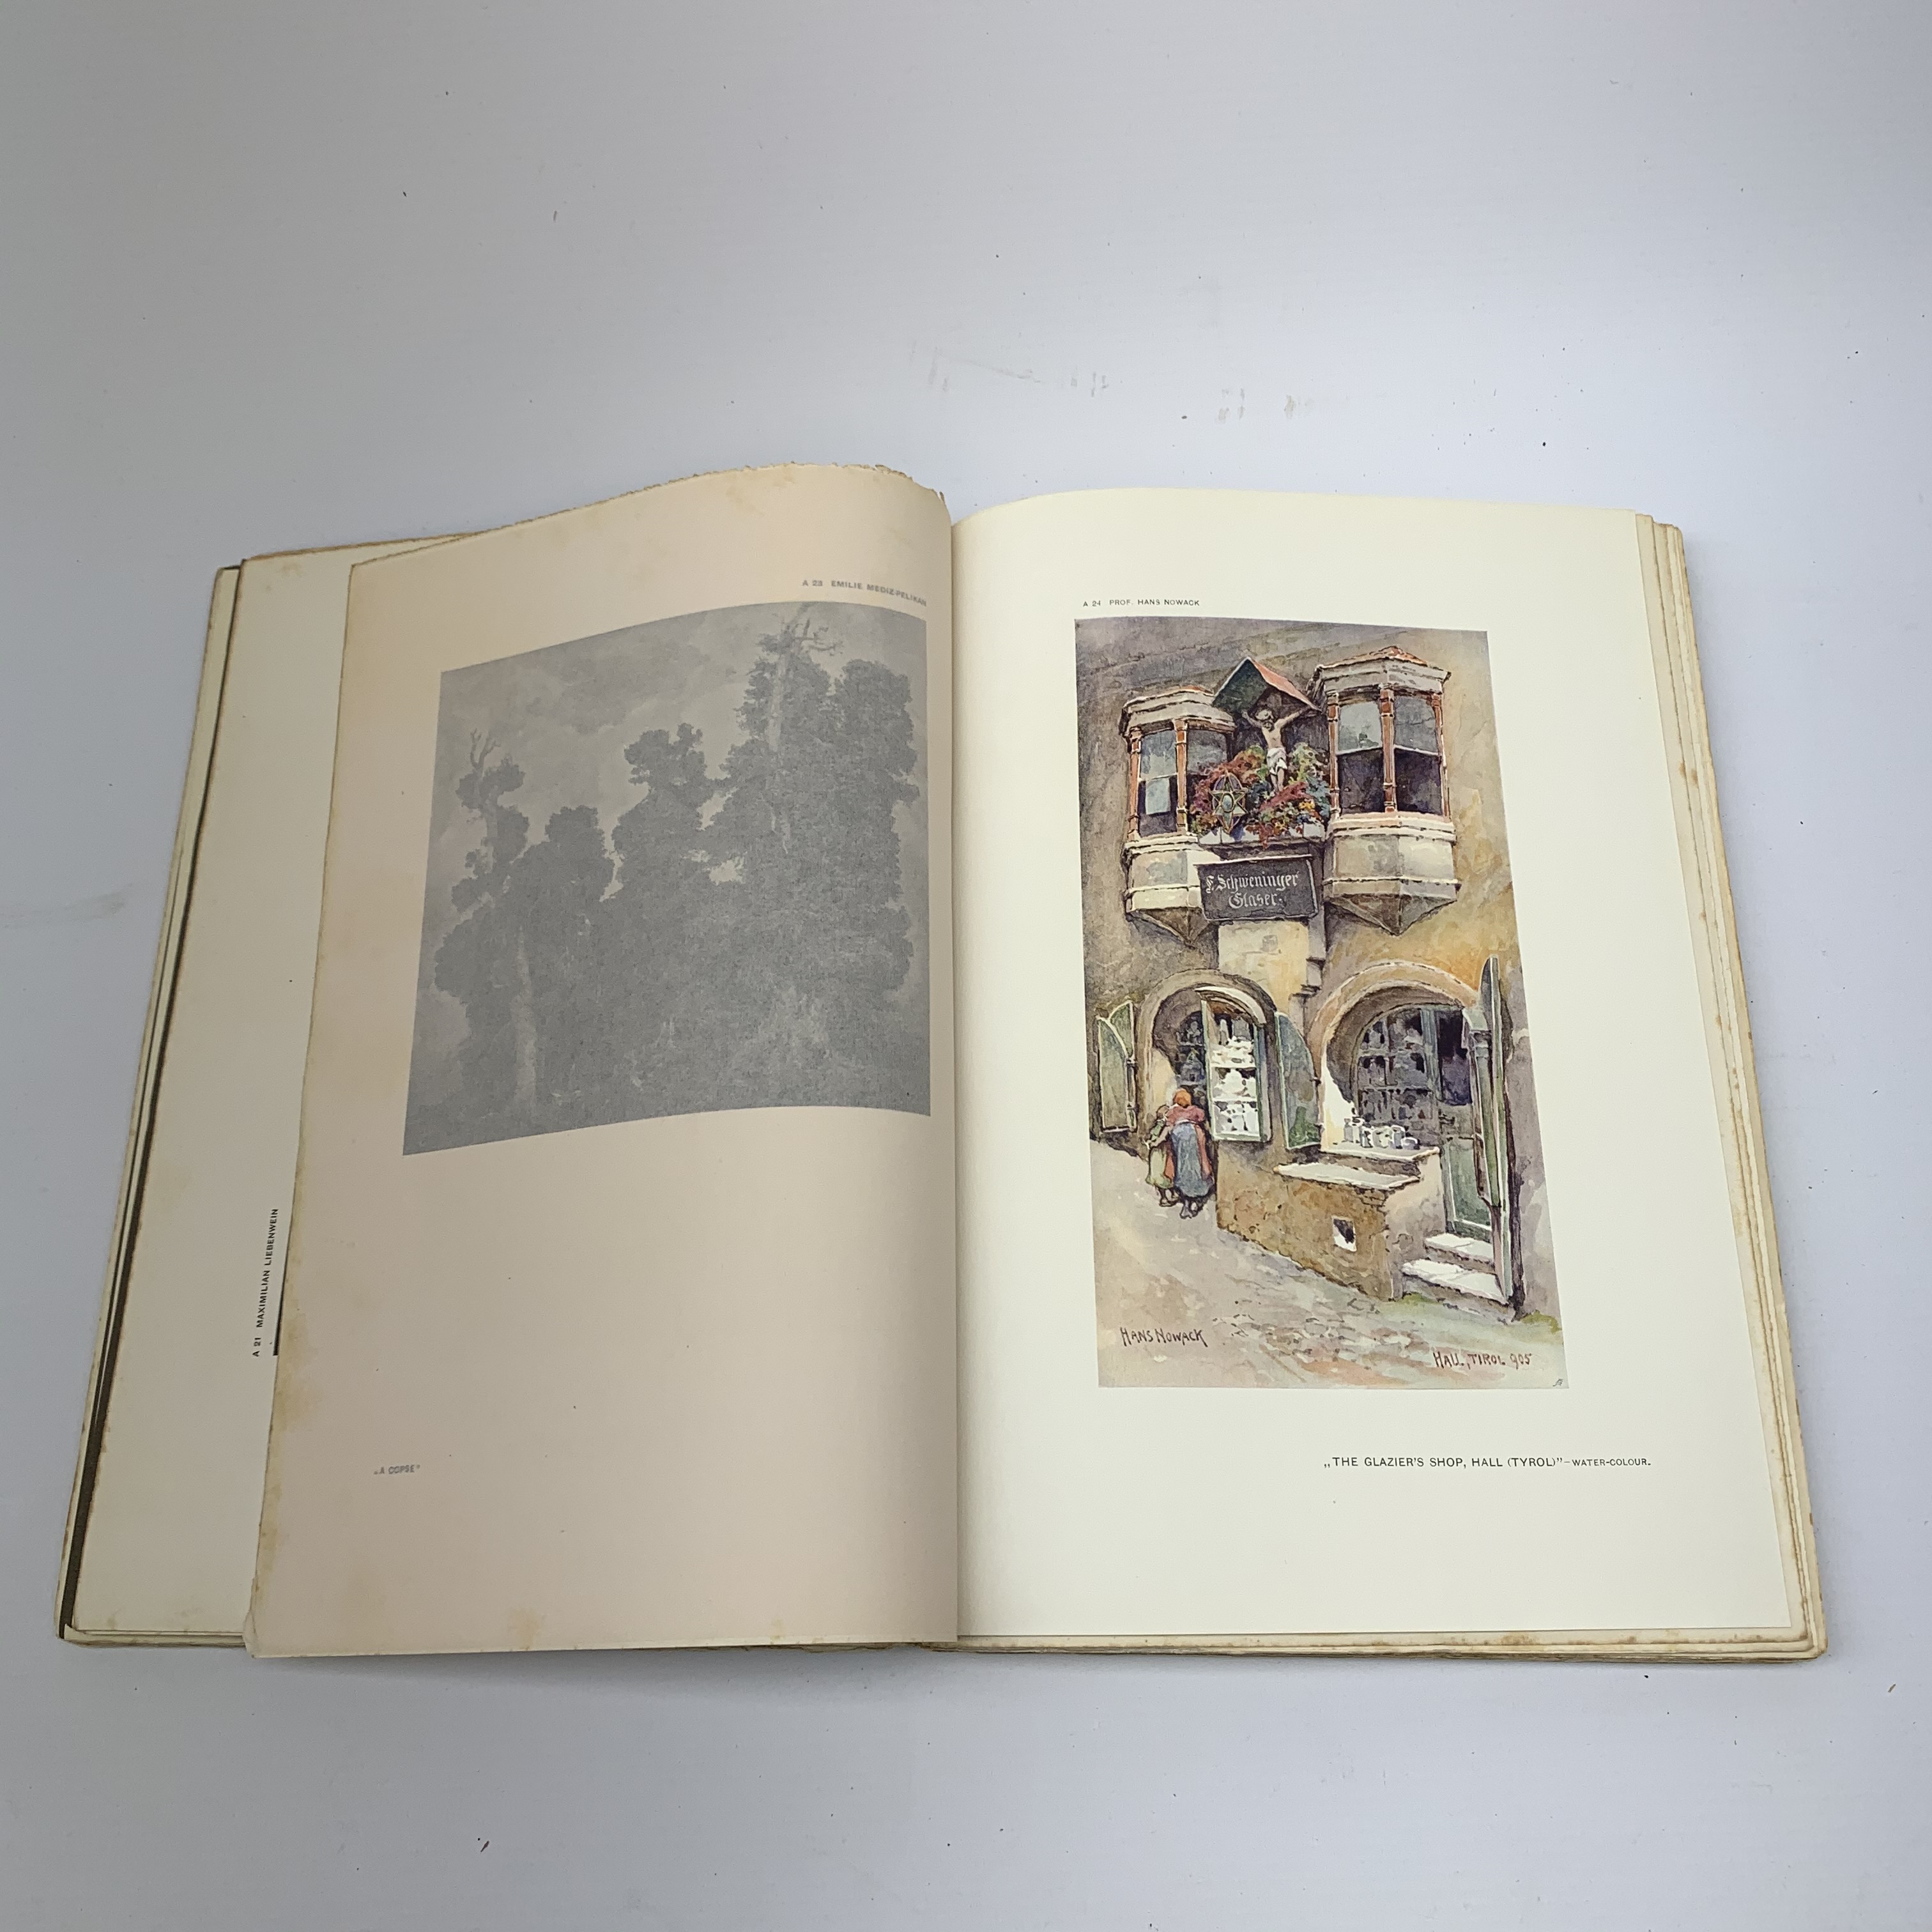 Holme Charles (Ed), The Art Revival in Austria, published by The Studio, Special Summer Number 1906. - Image 2 of 4